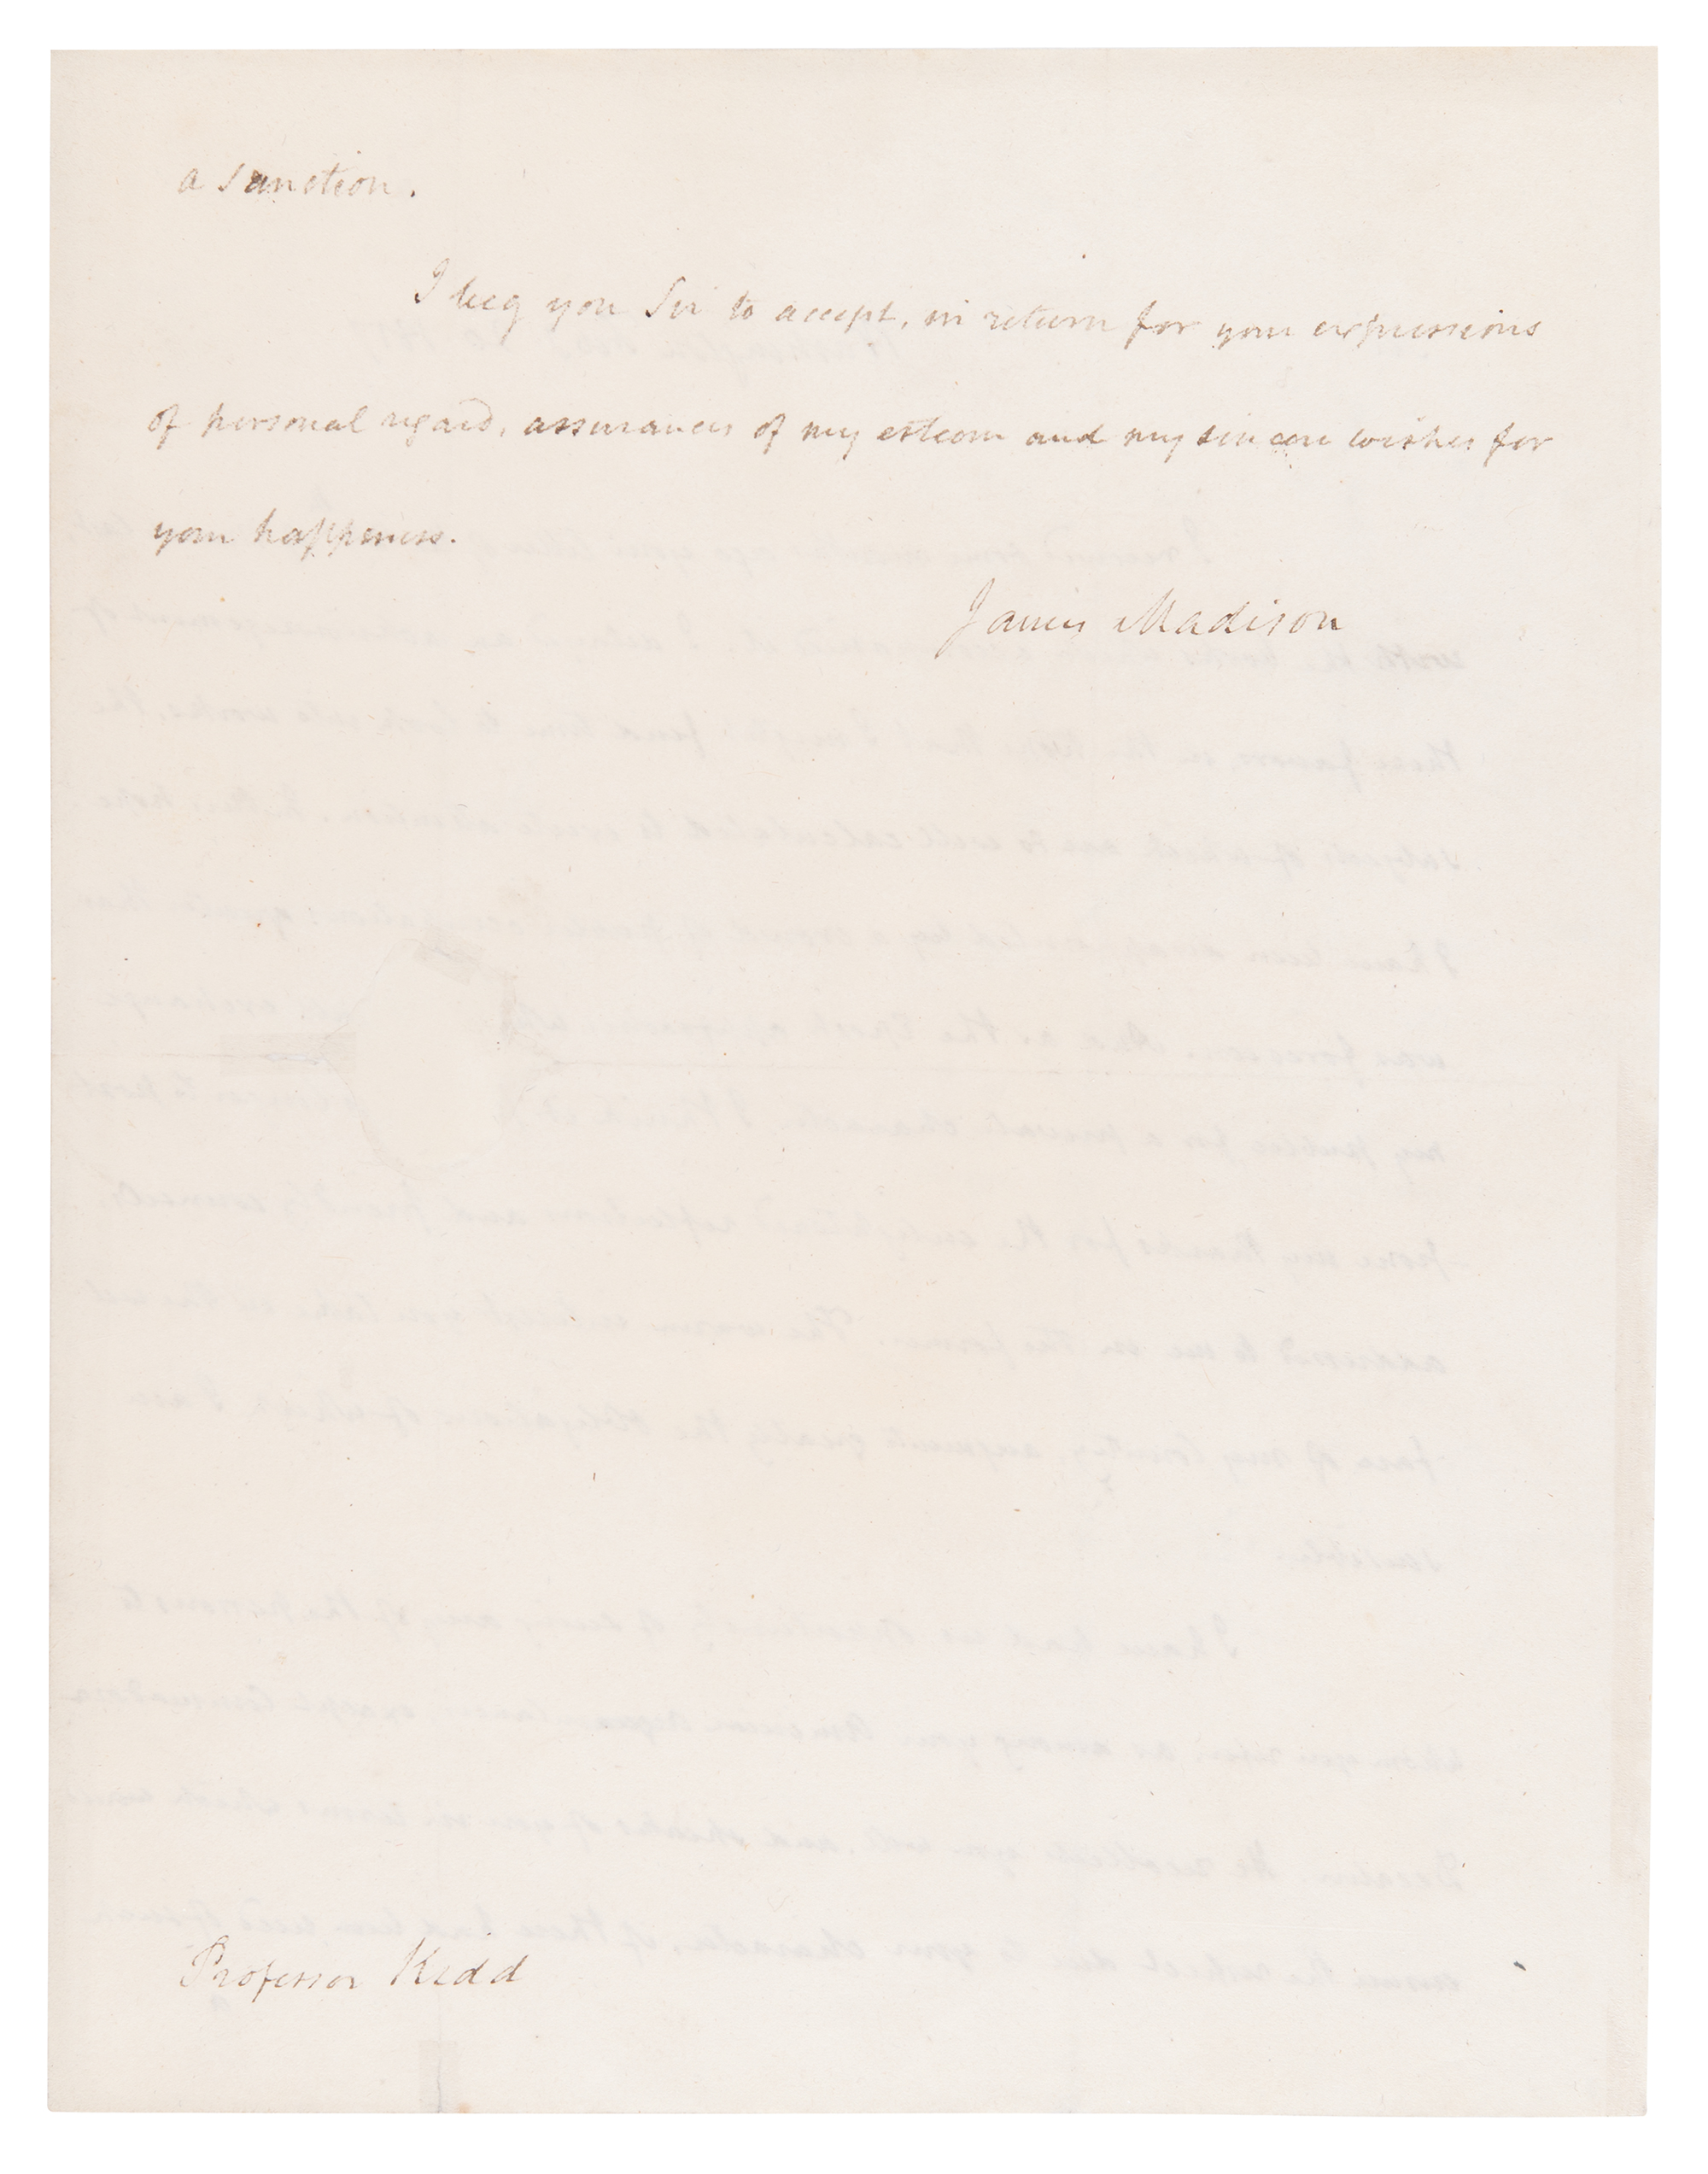 Lot #7 James Madison Autograph Letter Signed as President, Reflecting on the End of His Term and Mentioning Commodore Stephen Decatur - Image 3